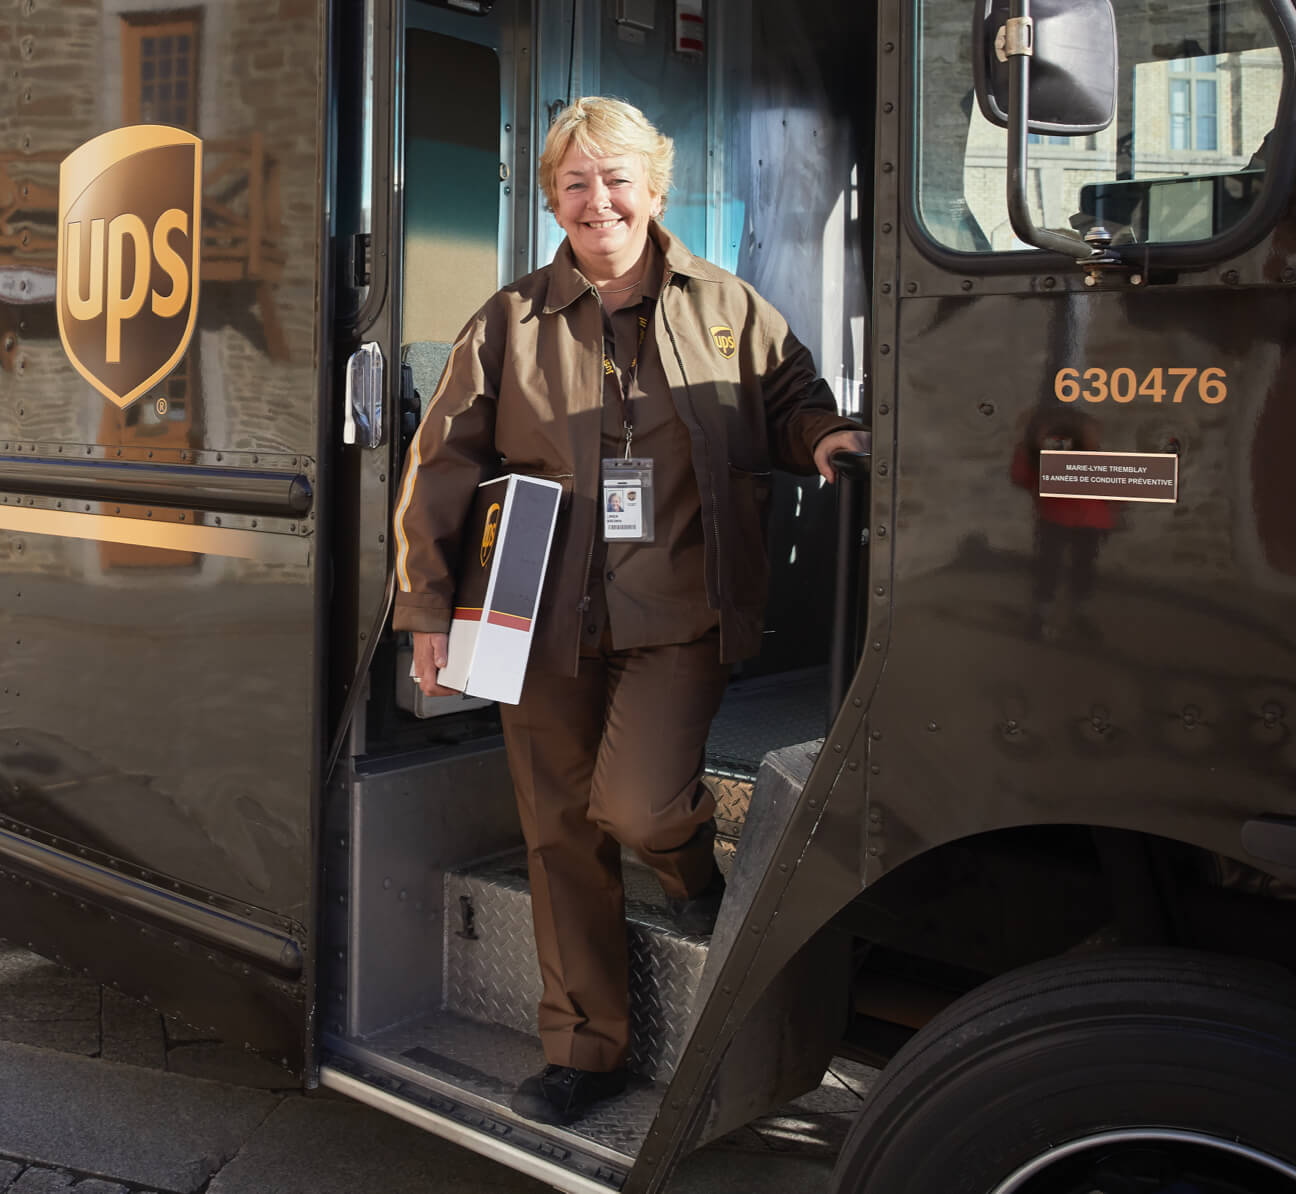 Drive Your Career Forward as an UPS Truck Driver Today!